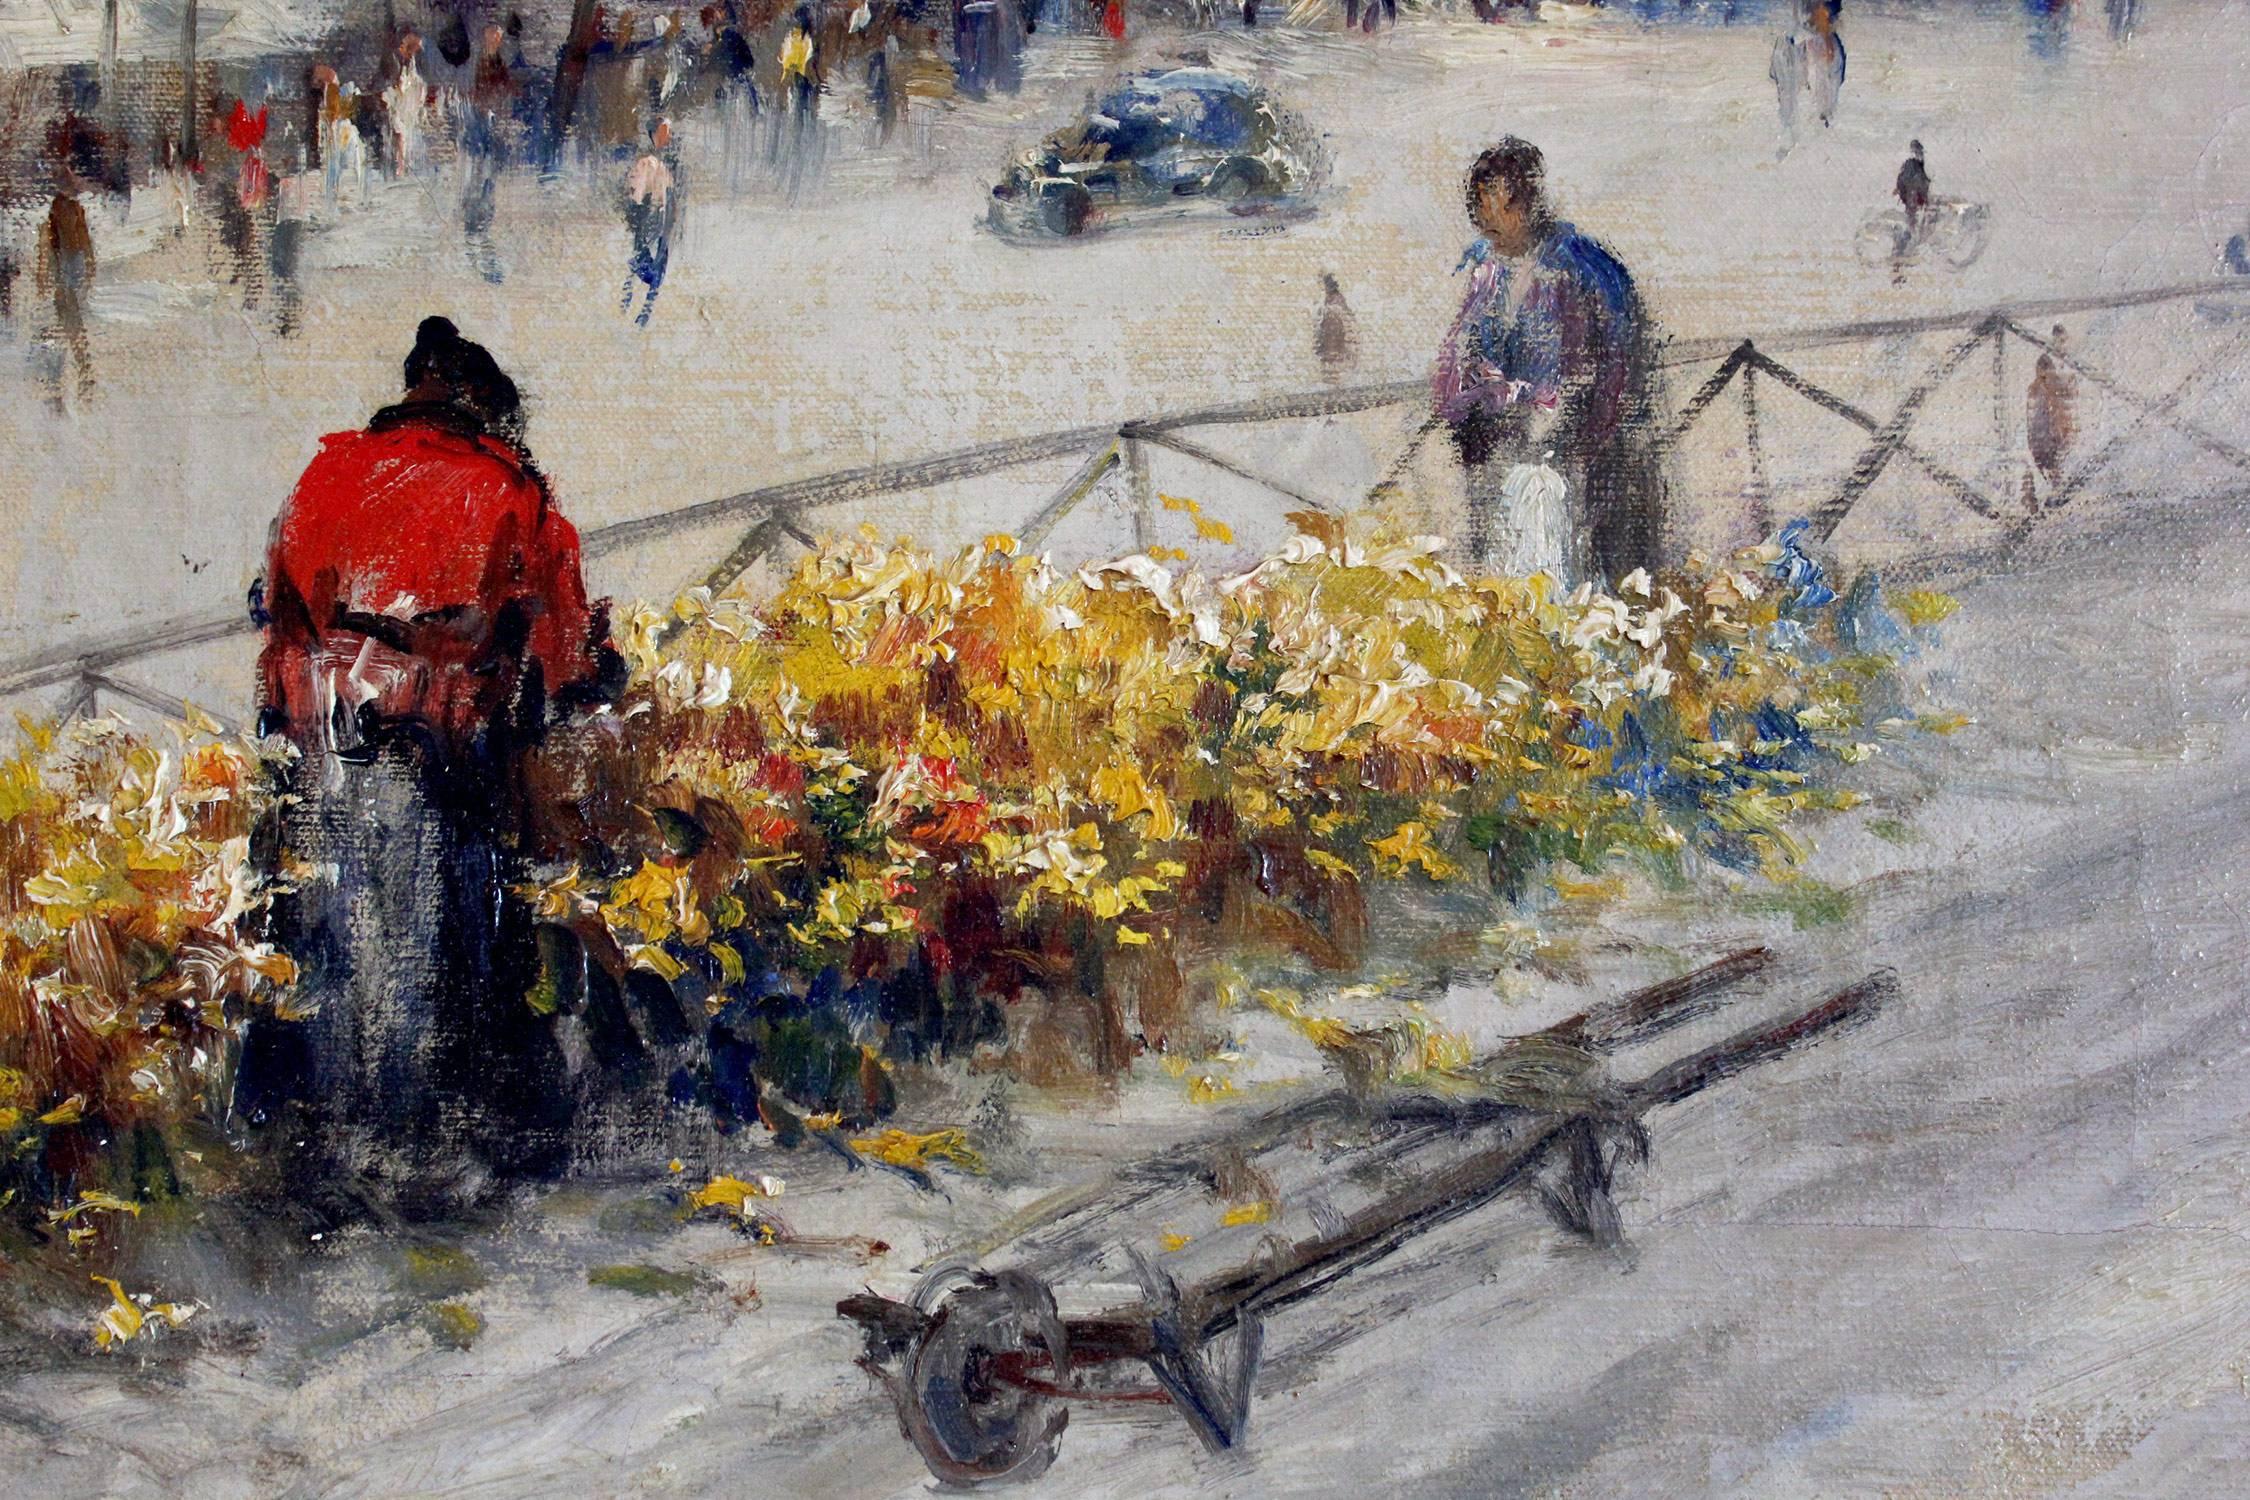 This piece is an exceptional impressionistic cityscape scene by Paul Gagni of flower vendors along the sidewalk, as pedestrians, bicycles, and cars stroll along the road. This Paris scene is depicted with soft brushwork and beautiful details. The